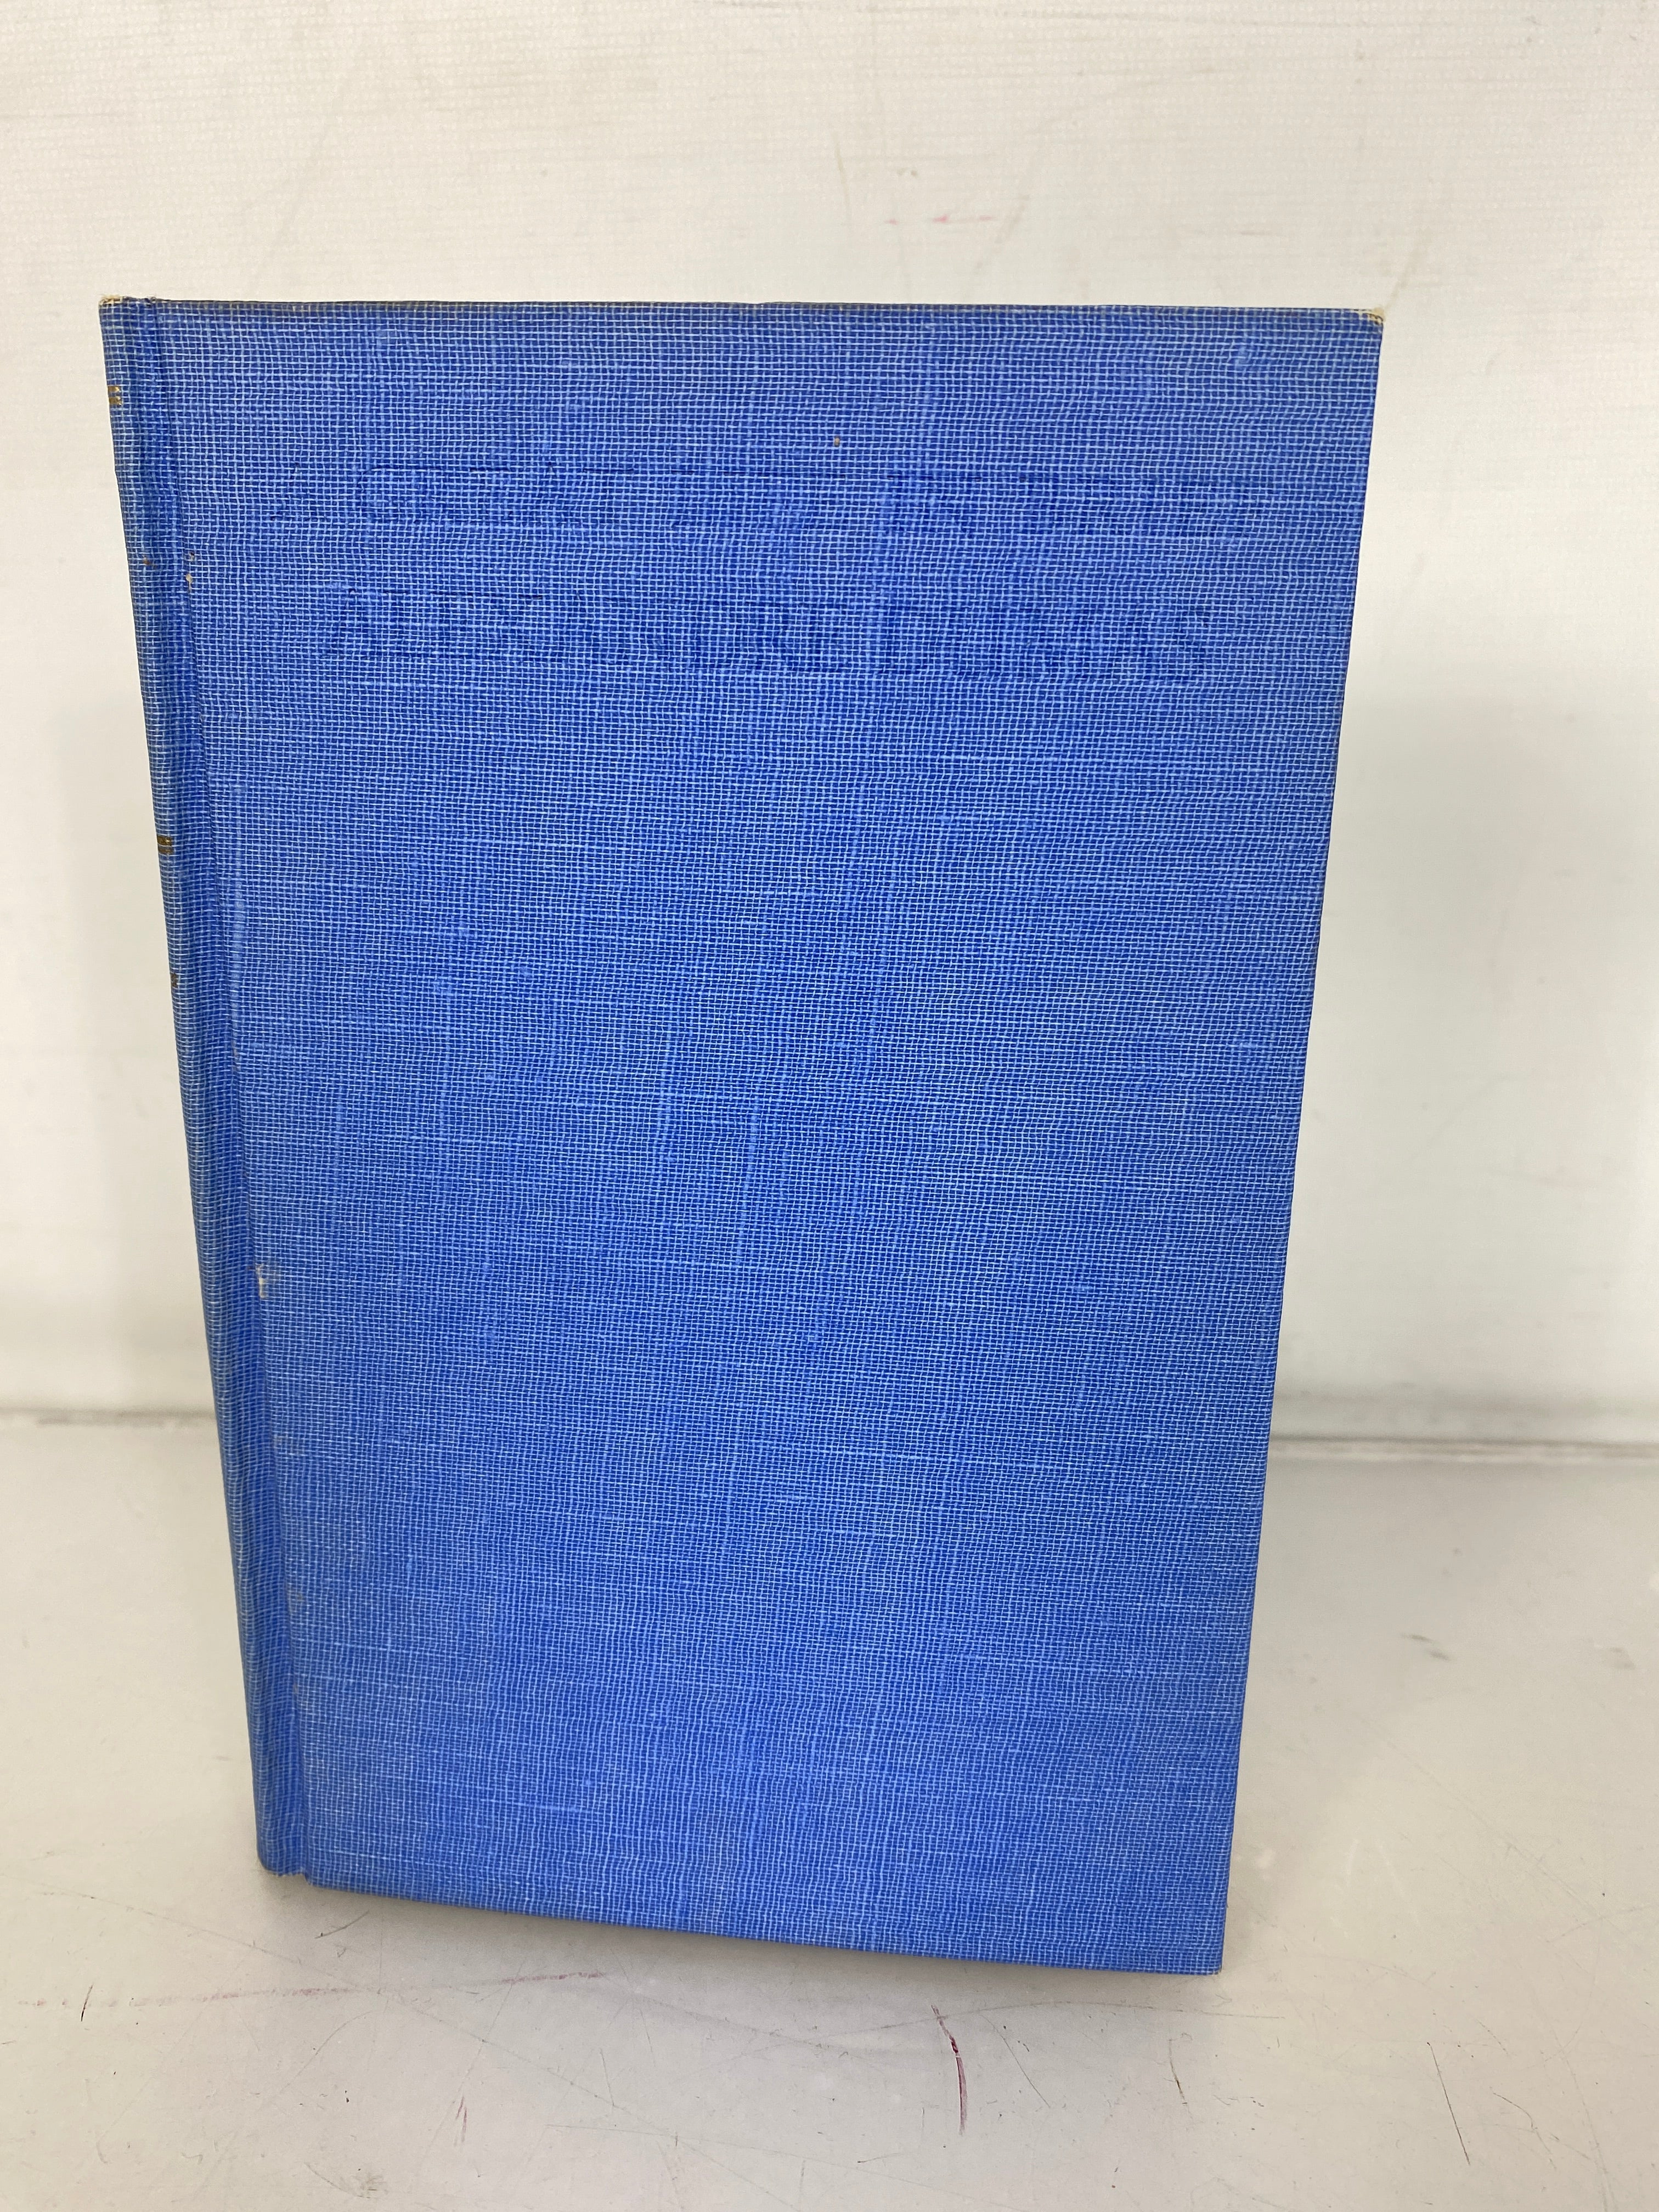 Alexandre Dumas A Great Life in Brief by Andre Maurois First Edition 1955 HC DJ